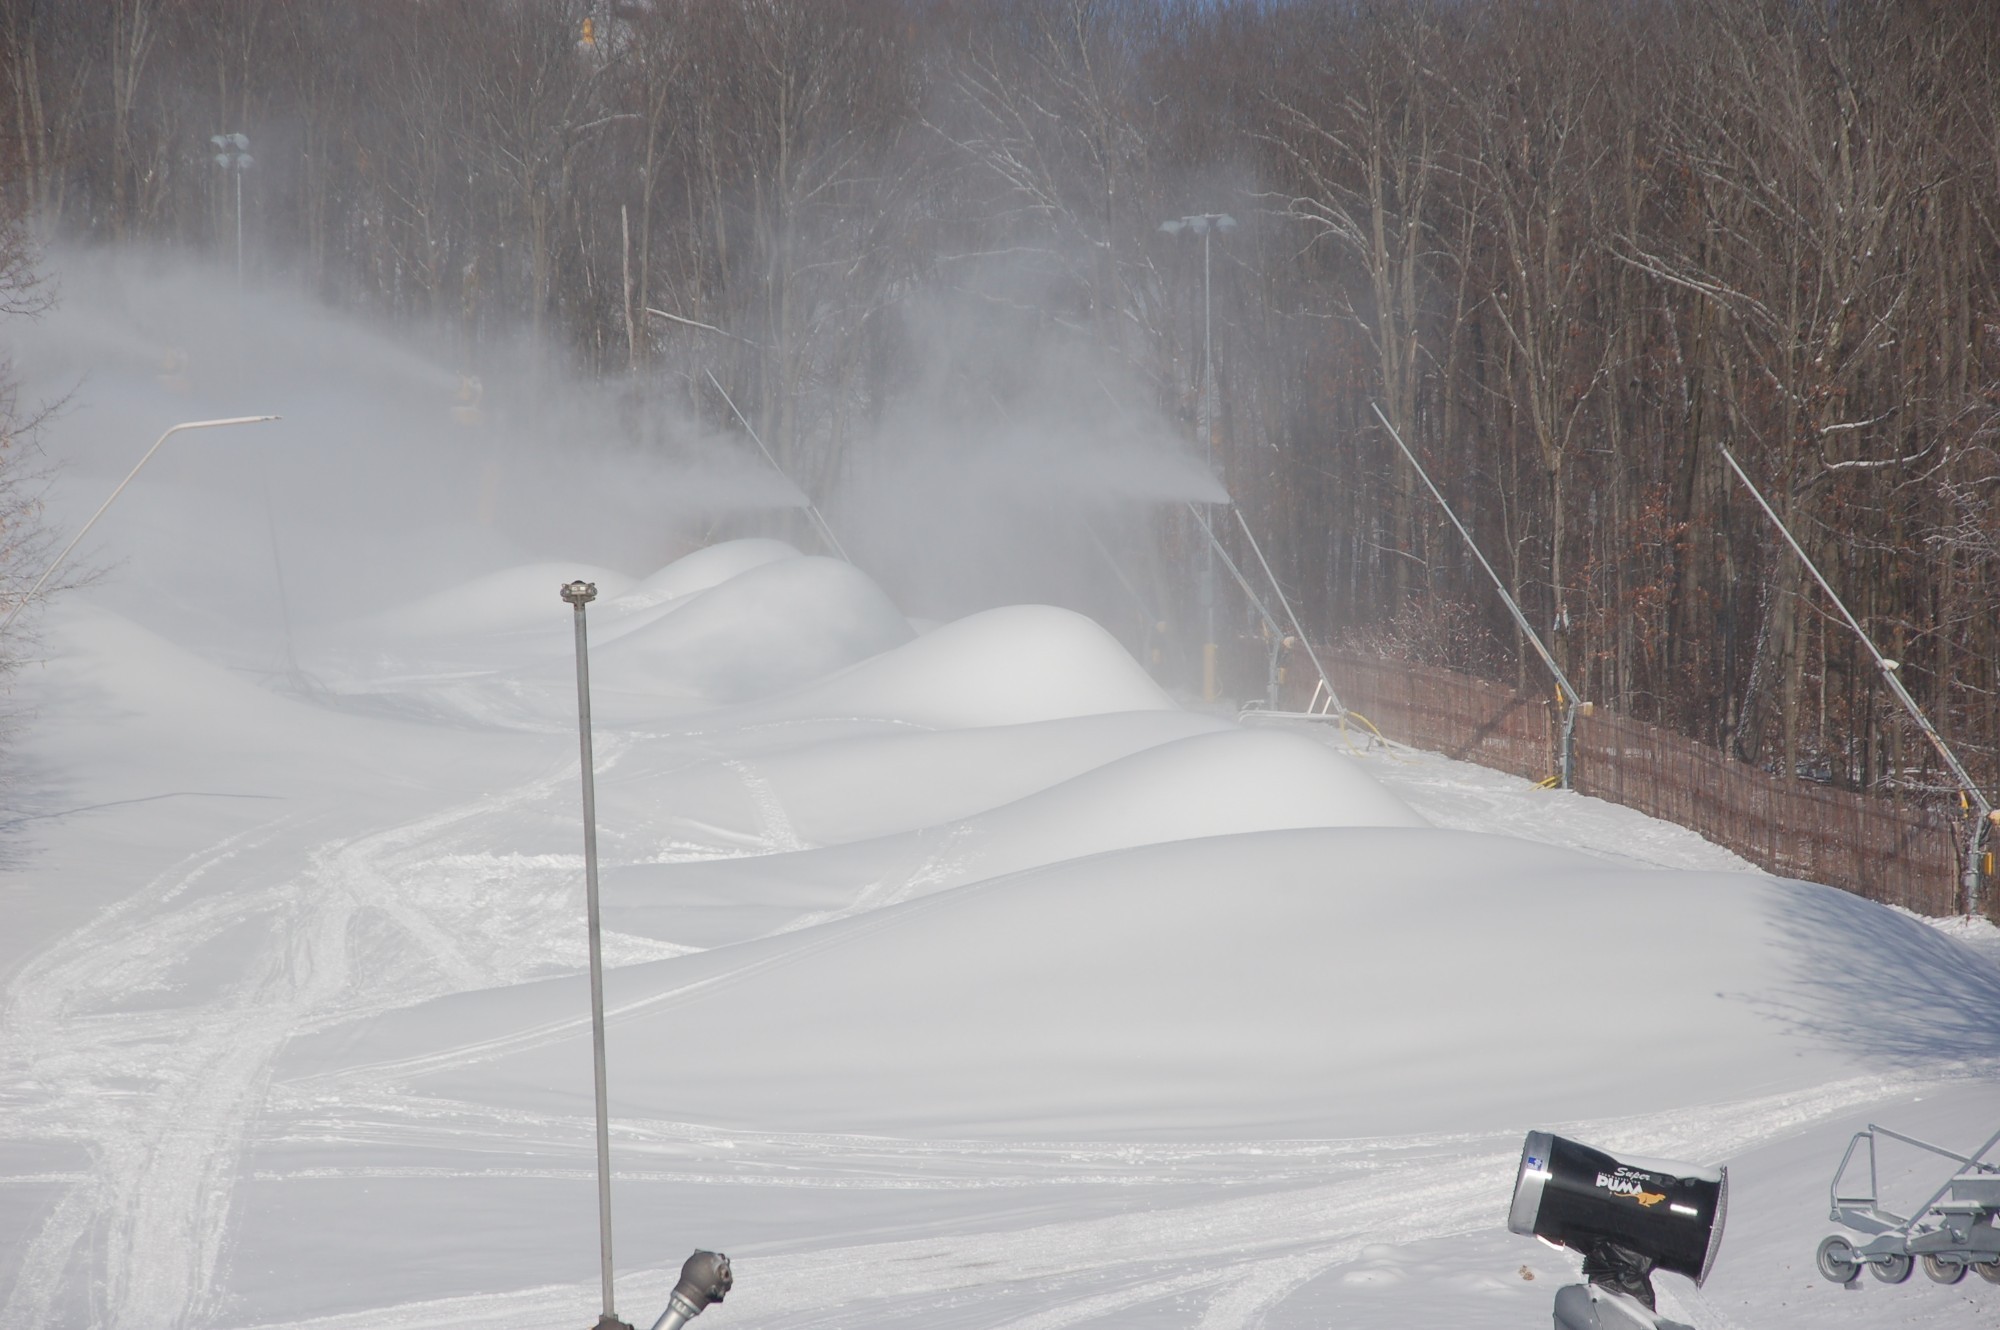 Opening Day is Friday November 15th - Mount St. Louis Moonstone